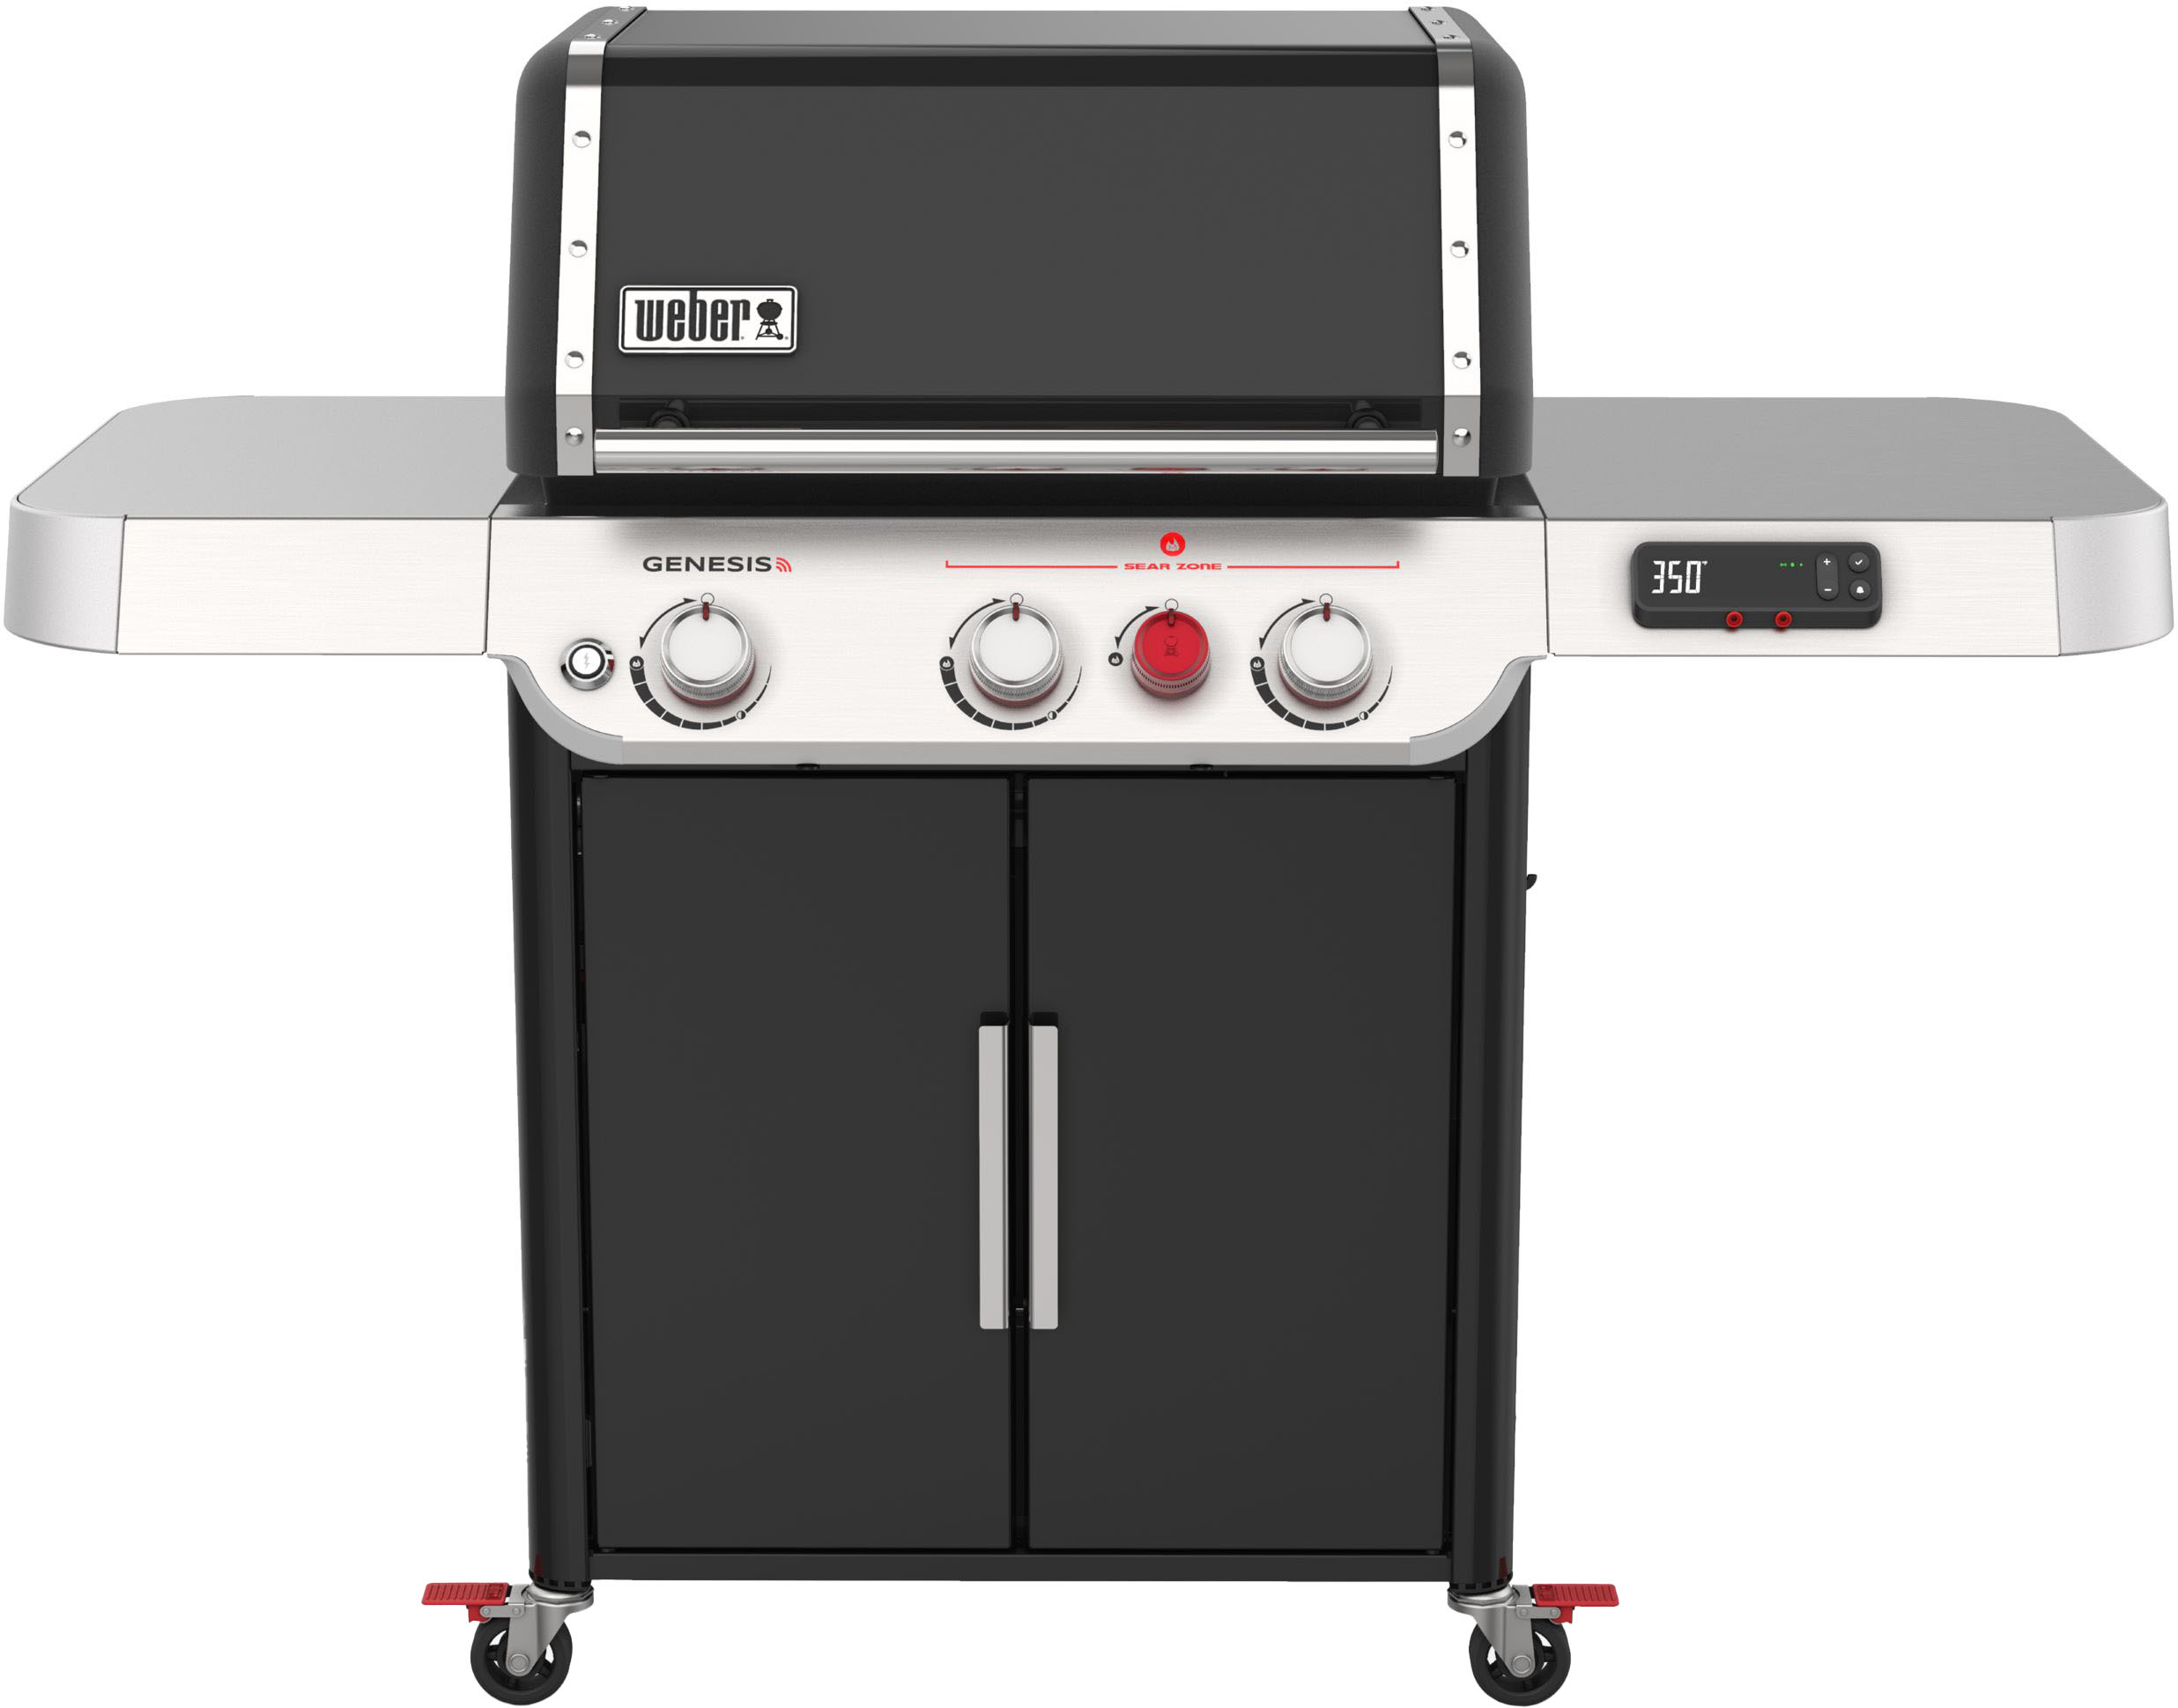 Angle View: Weber - Genesis EX-325s Propane Gas Grill - Black